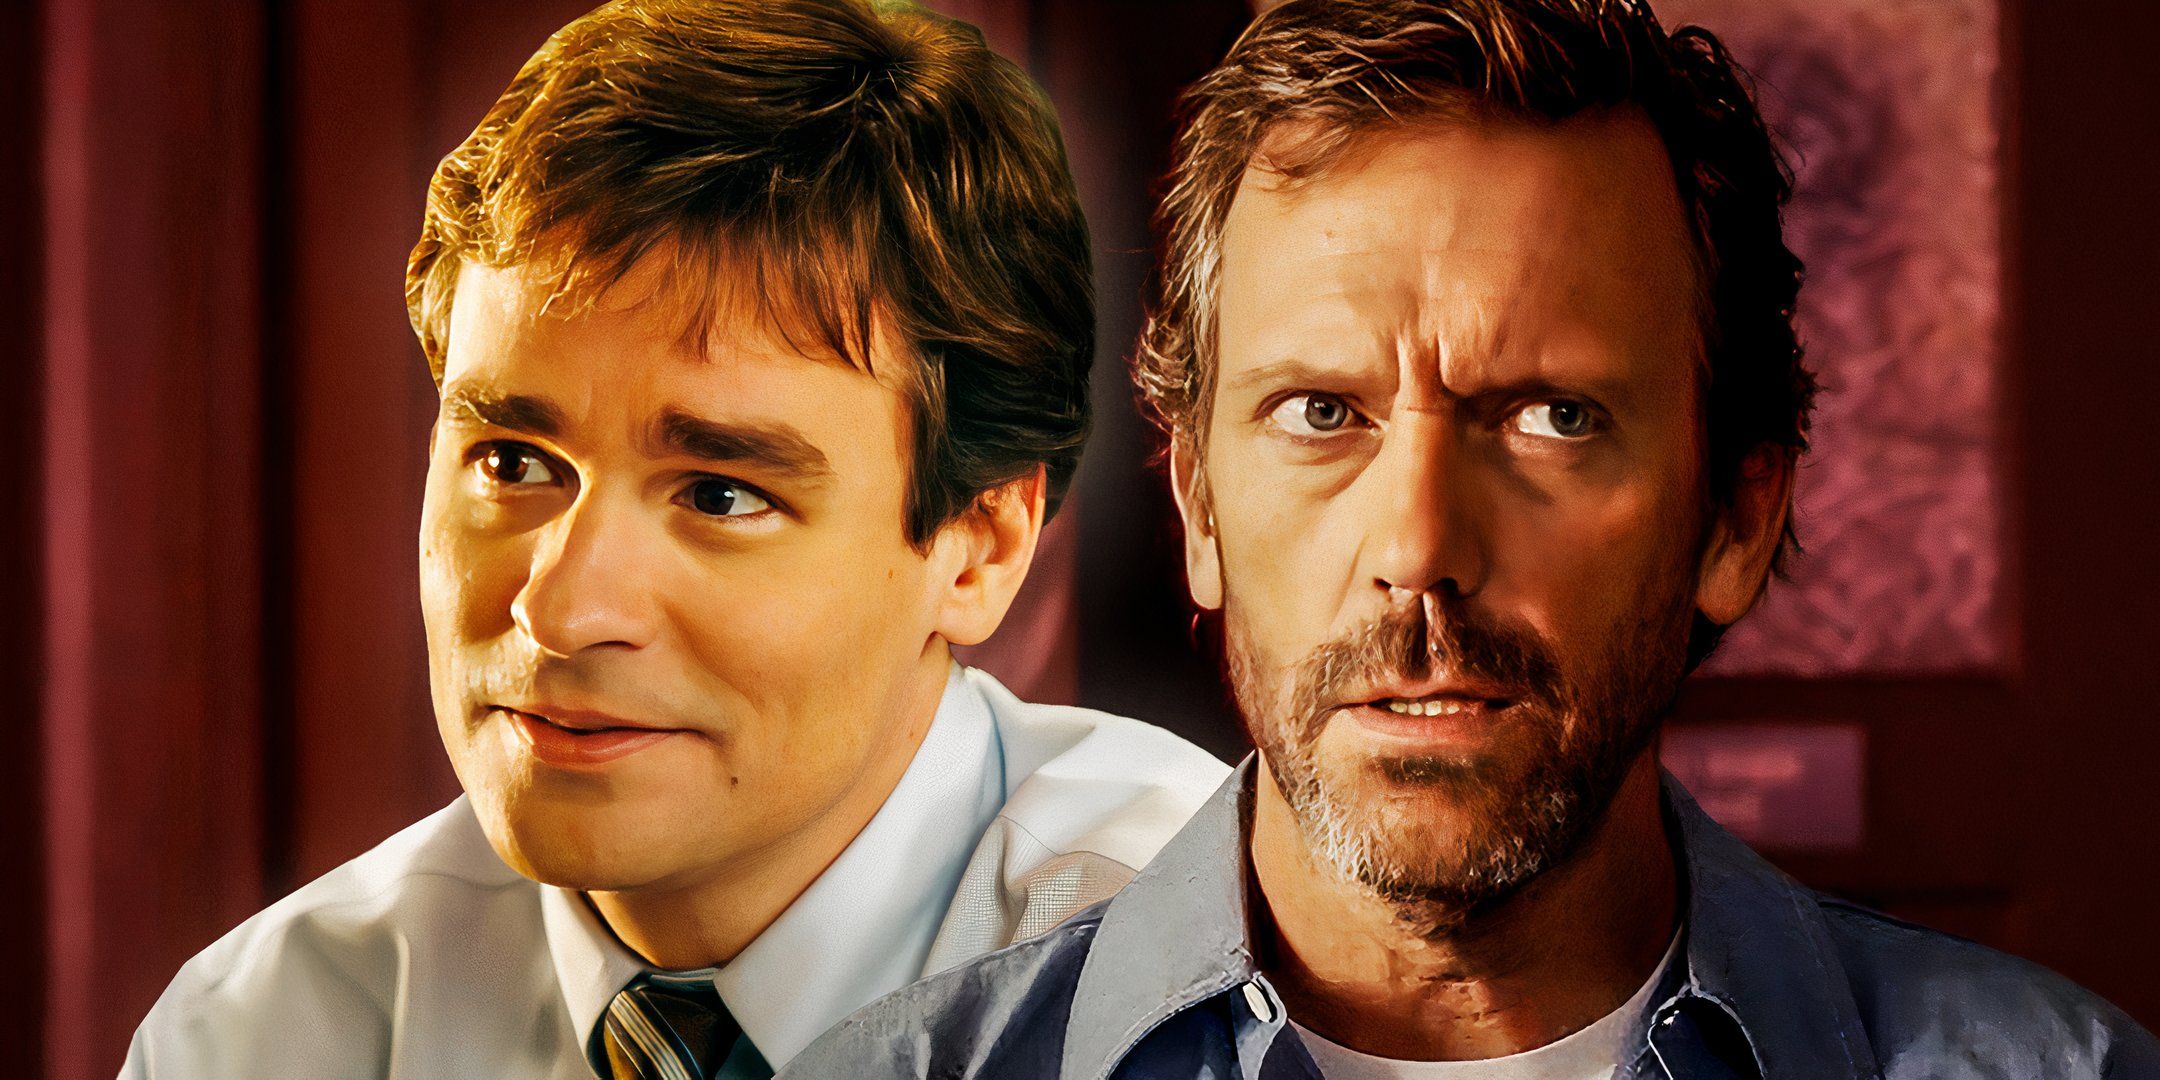 Robert-Sean-Leonard-as-Dr.-James-Wilson-from-House-and-(Hugh-Laurie-as--Dr